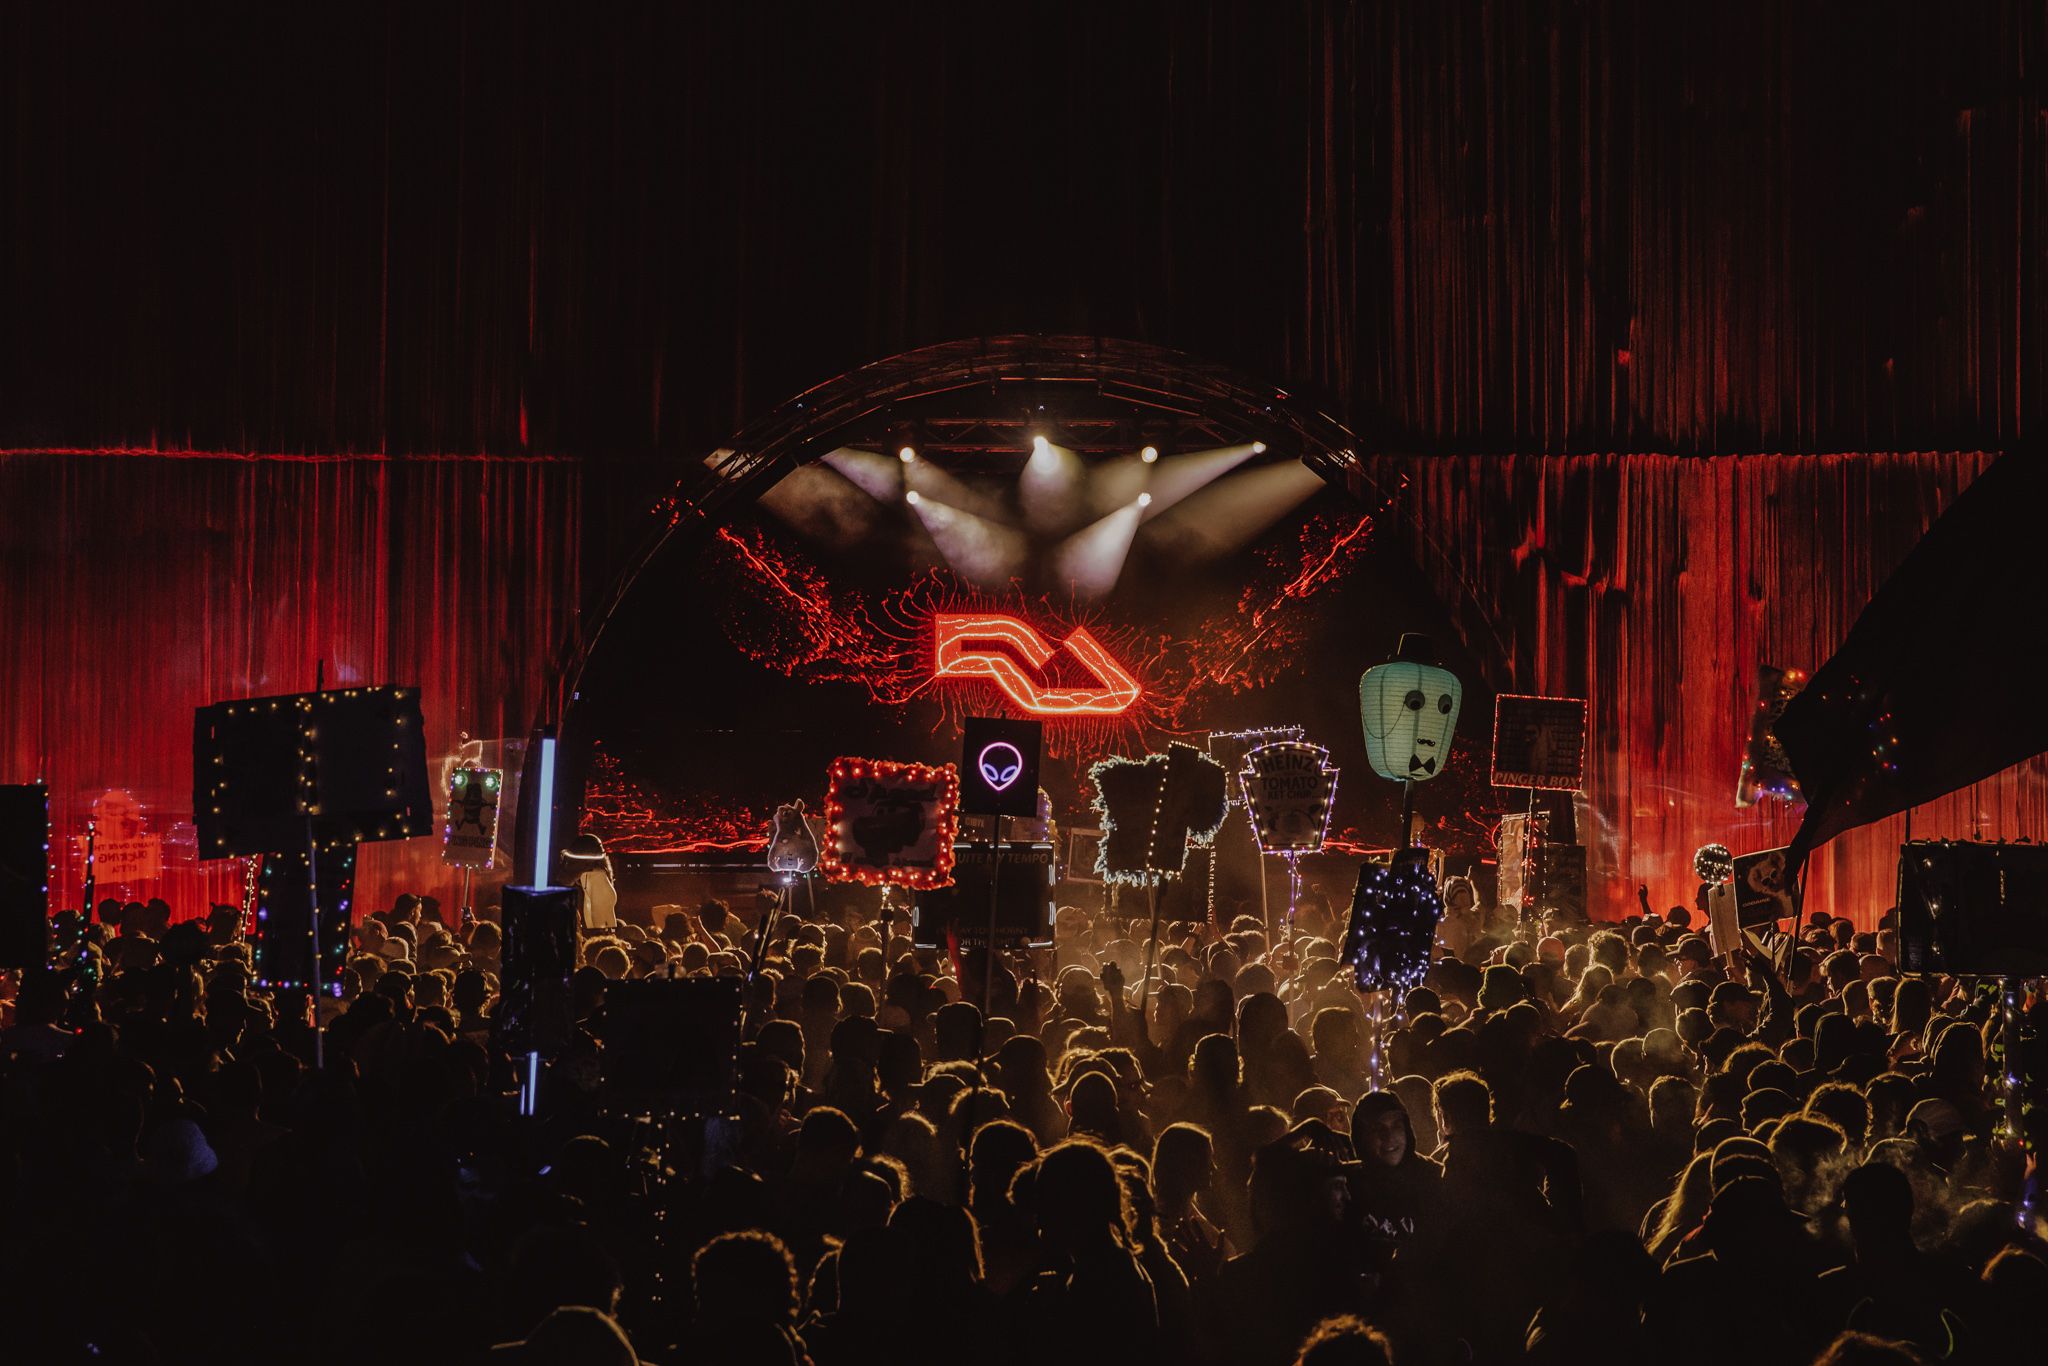 Cover image for Behind the Scenes with Pitch Music & Arts: Insights from Senior Marketing Manager on Building a Festival That Inspires, Connects, and Expands